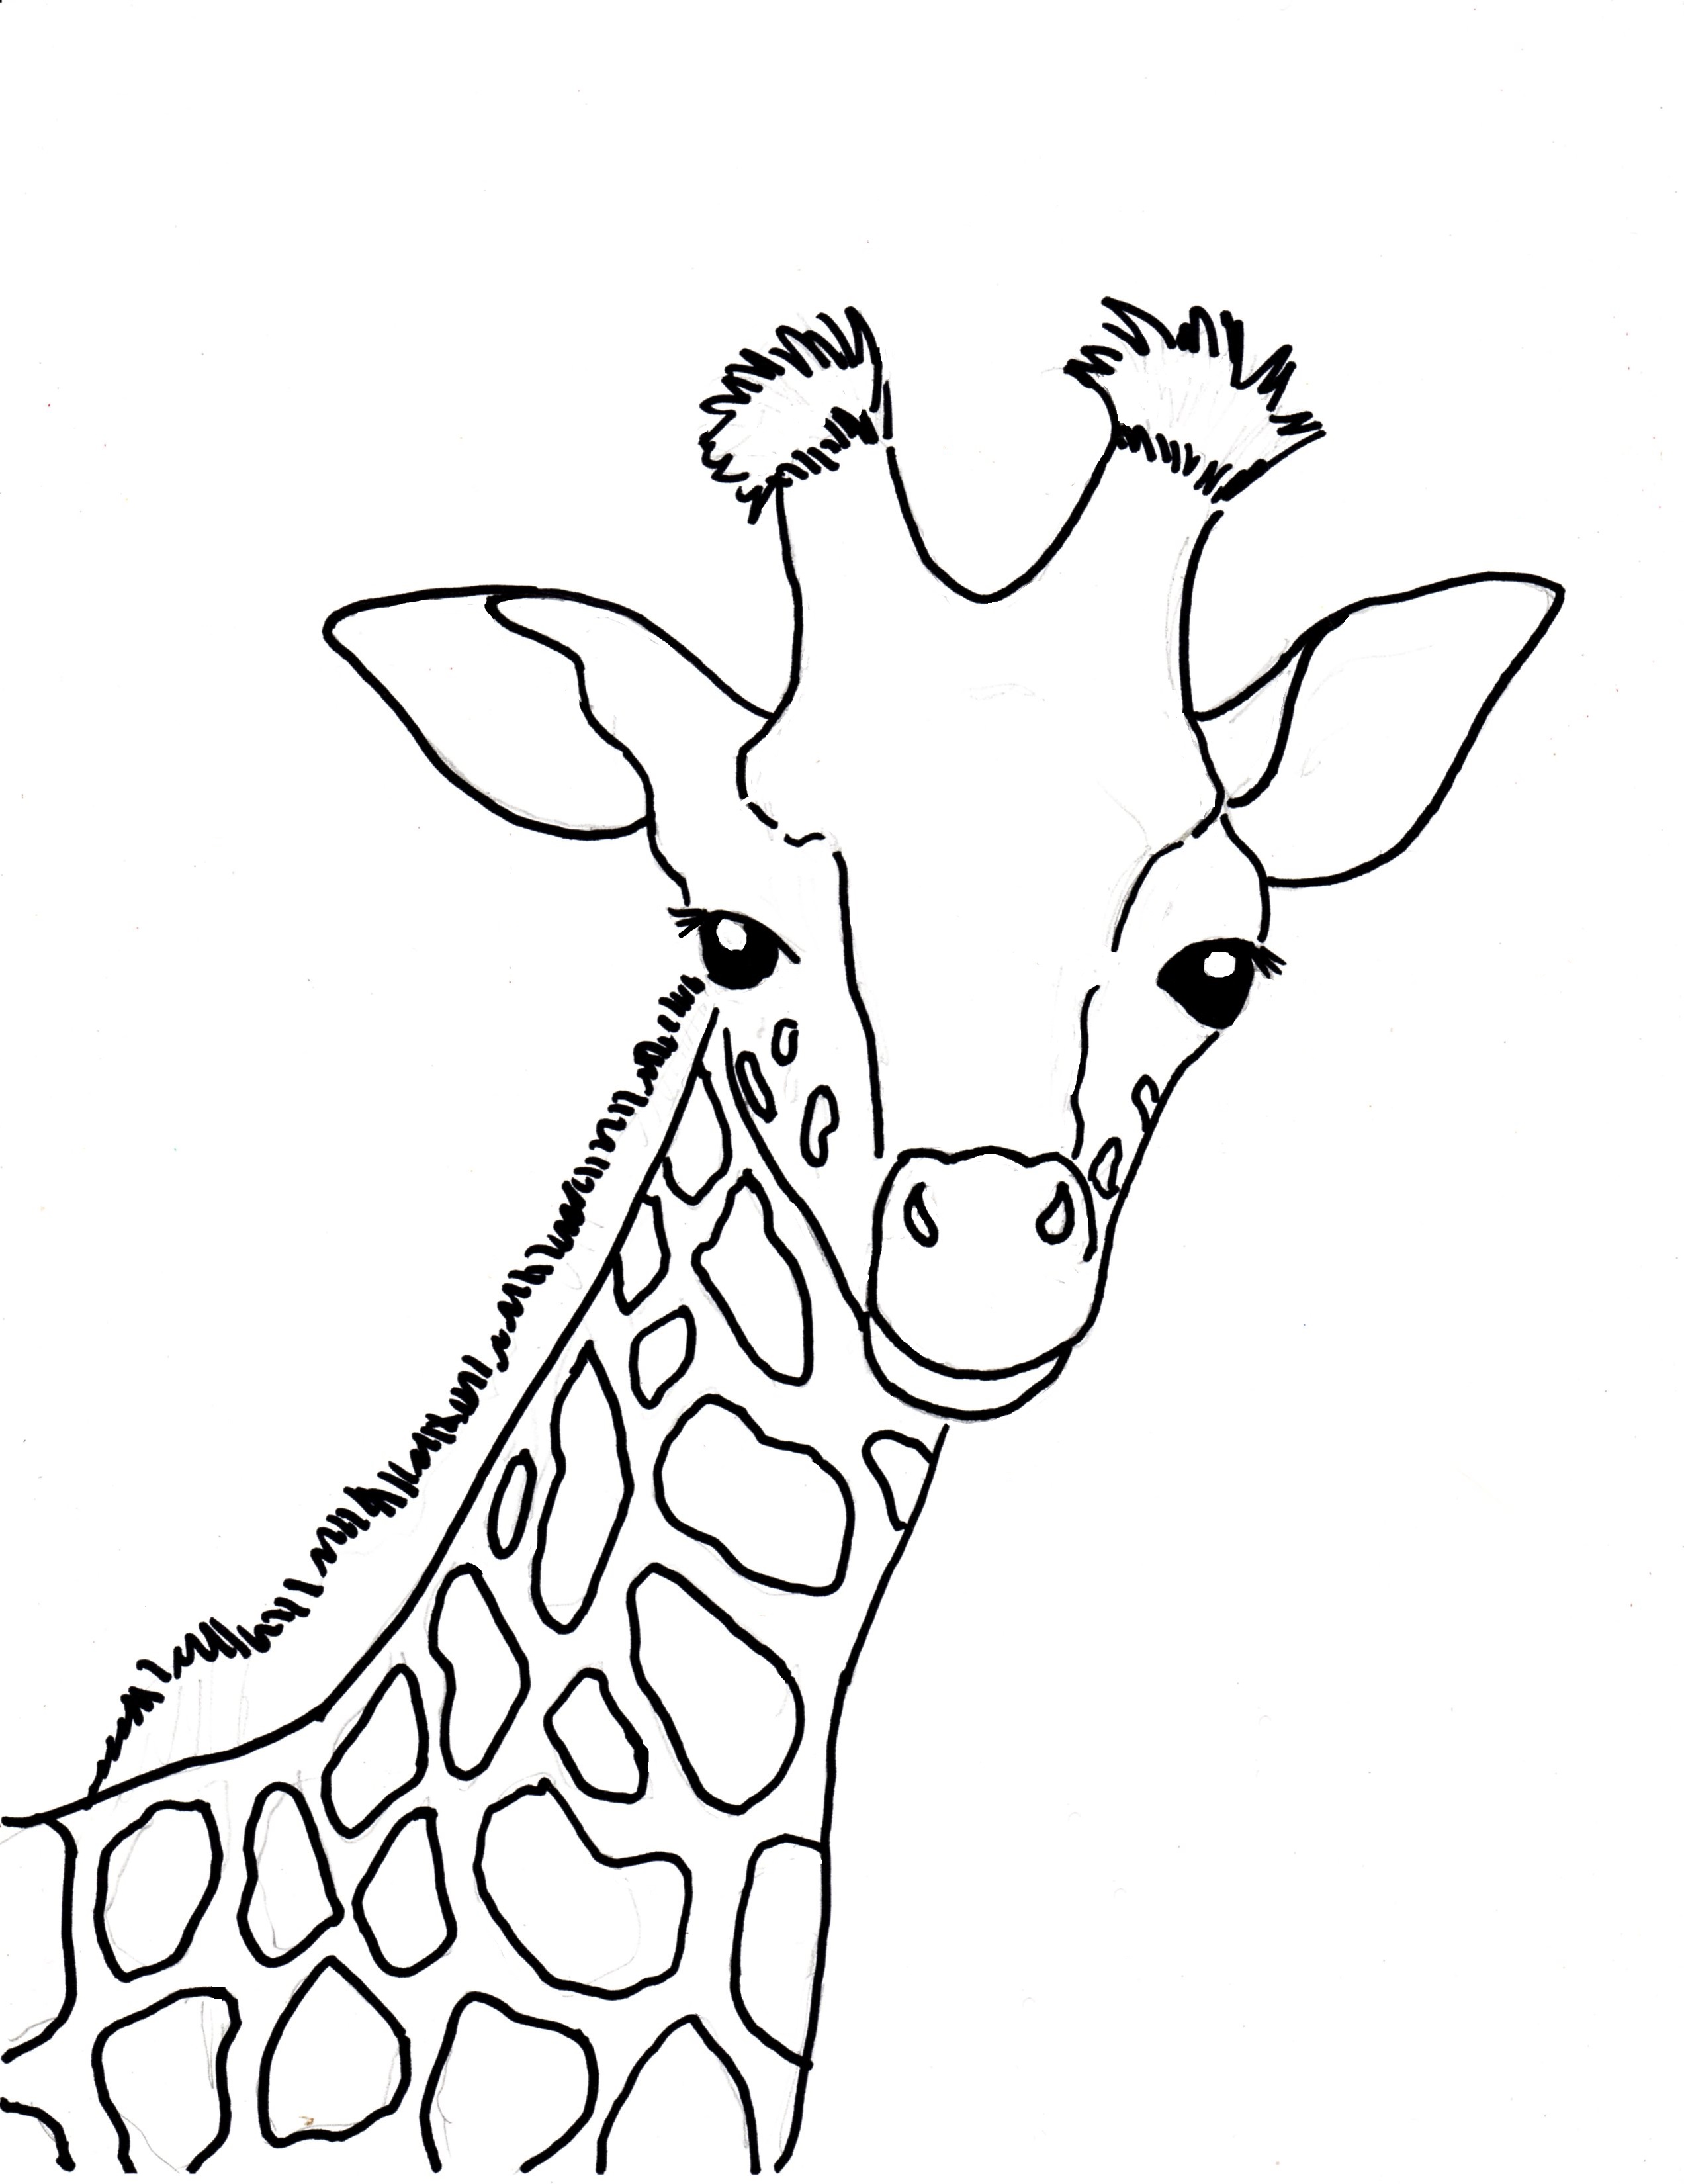 Download Baby Giraffe Coloring Page Art Starts